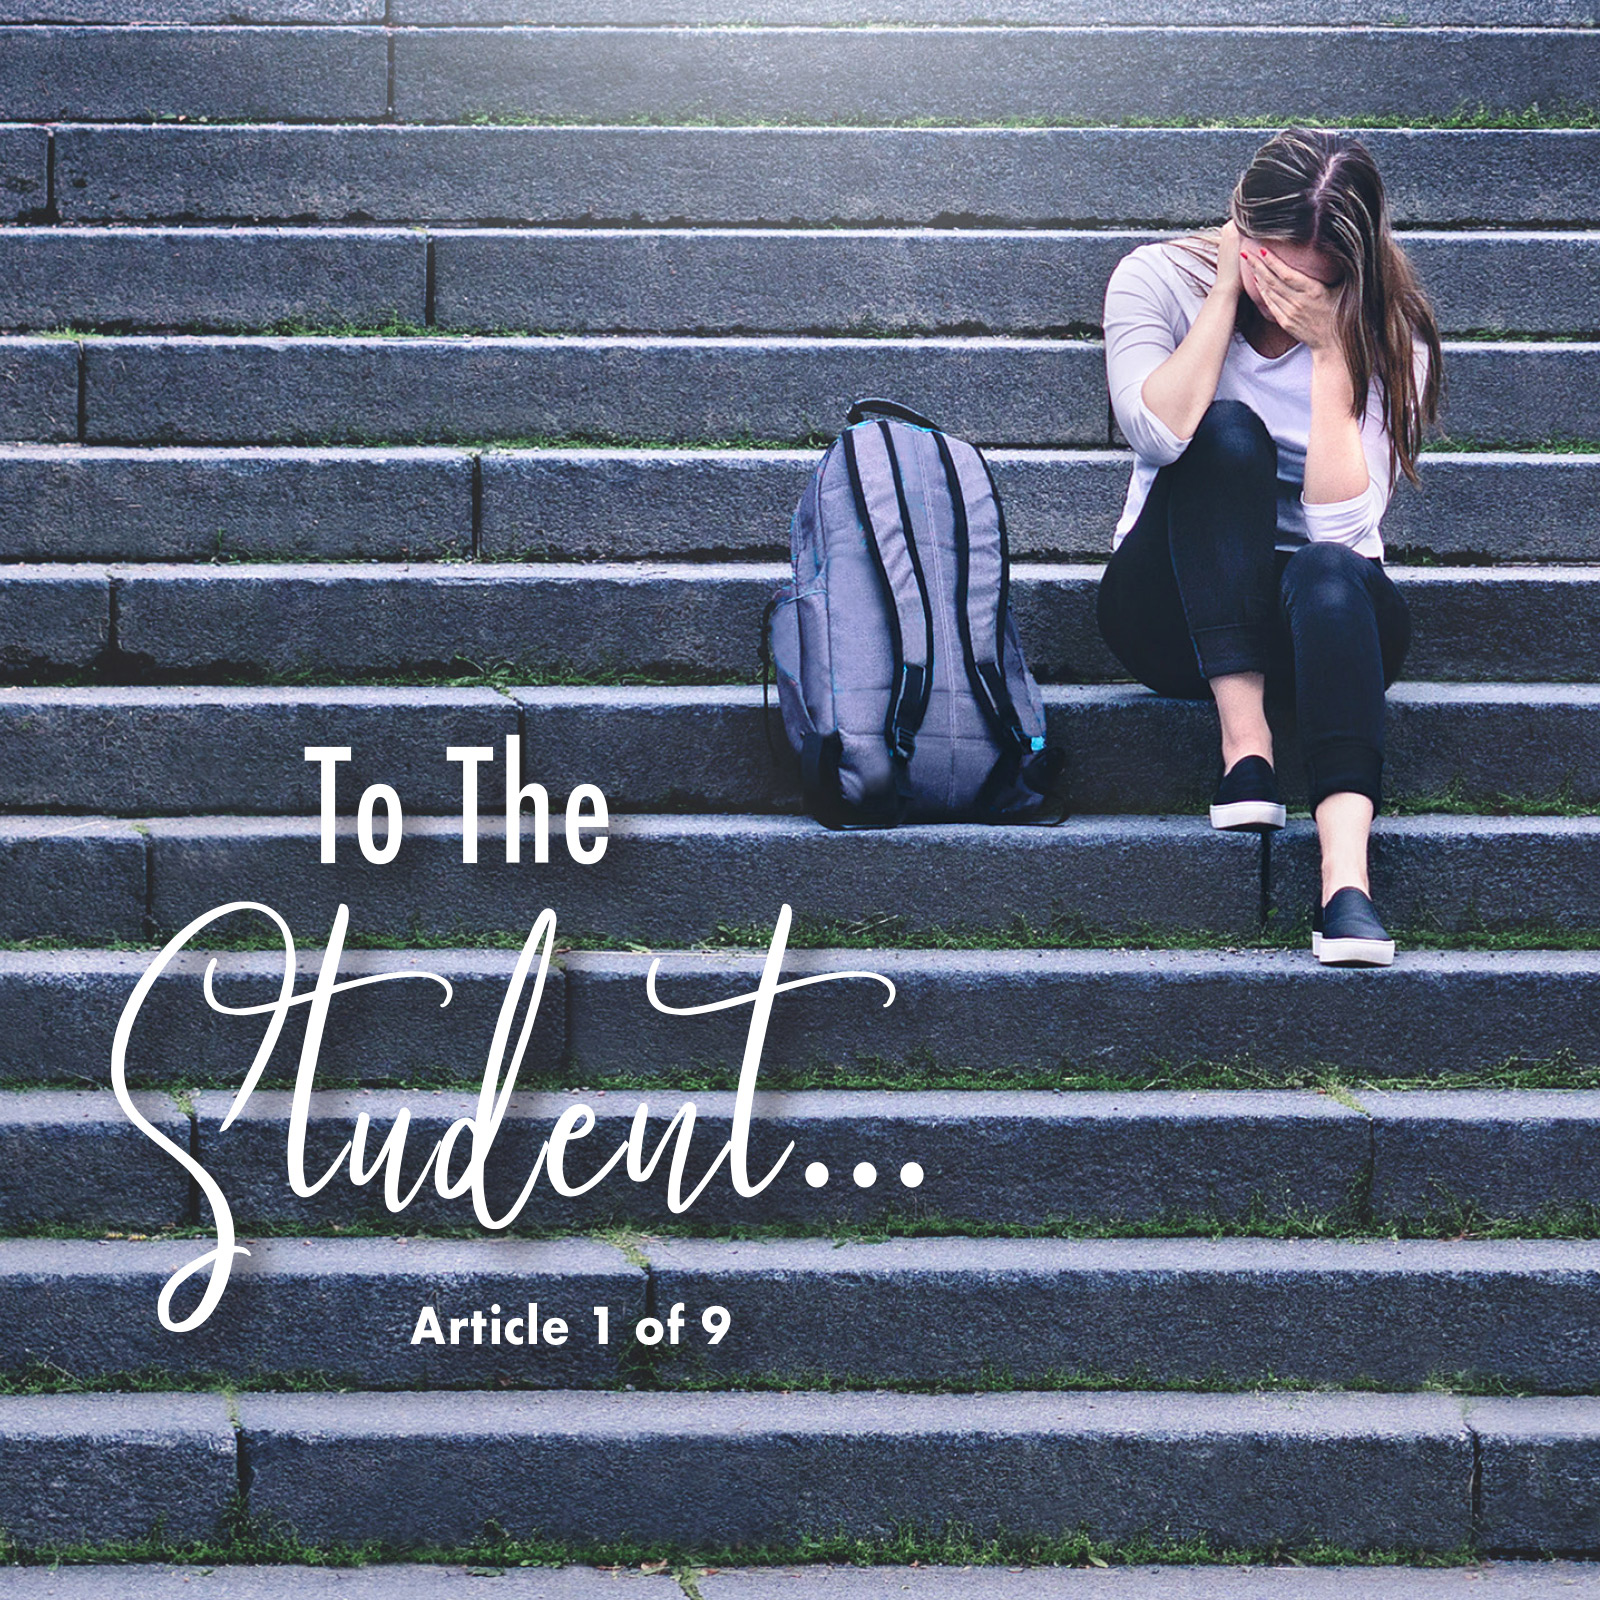 Image for 'To the Student…'